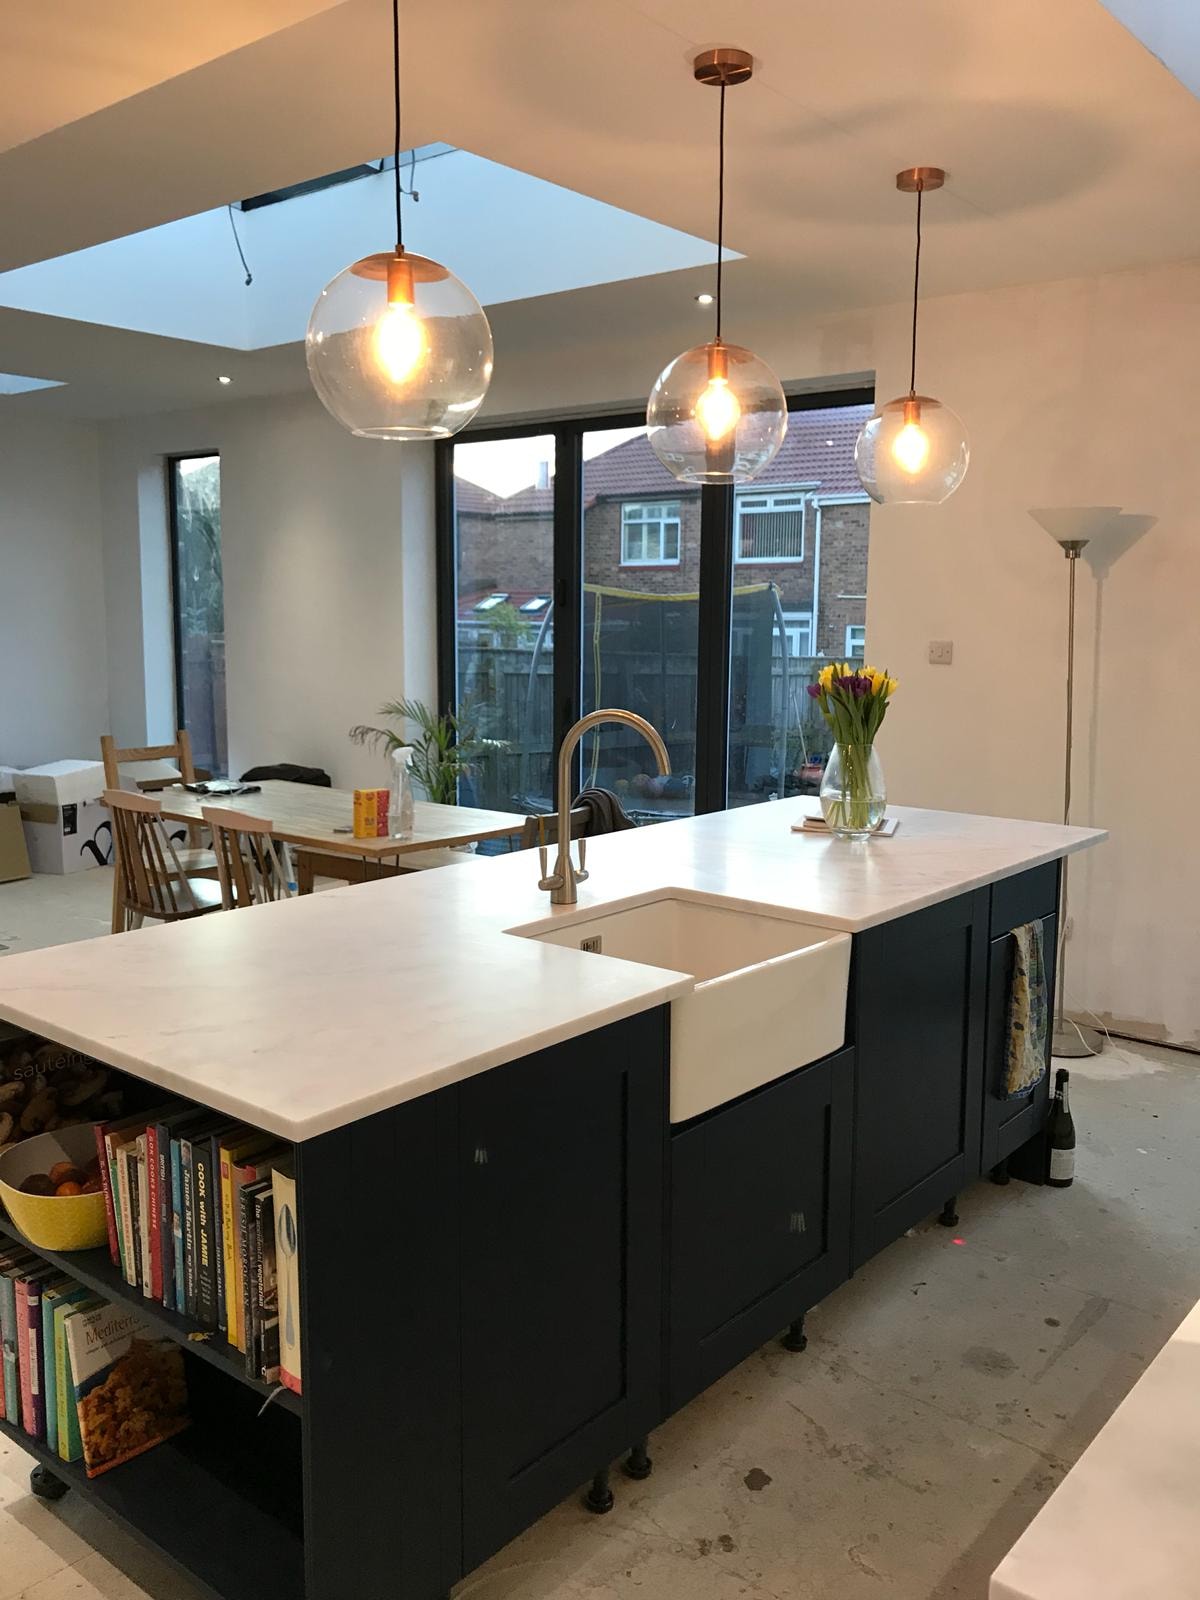 electrician kitchen project in newcastle upon tyne